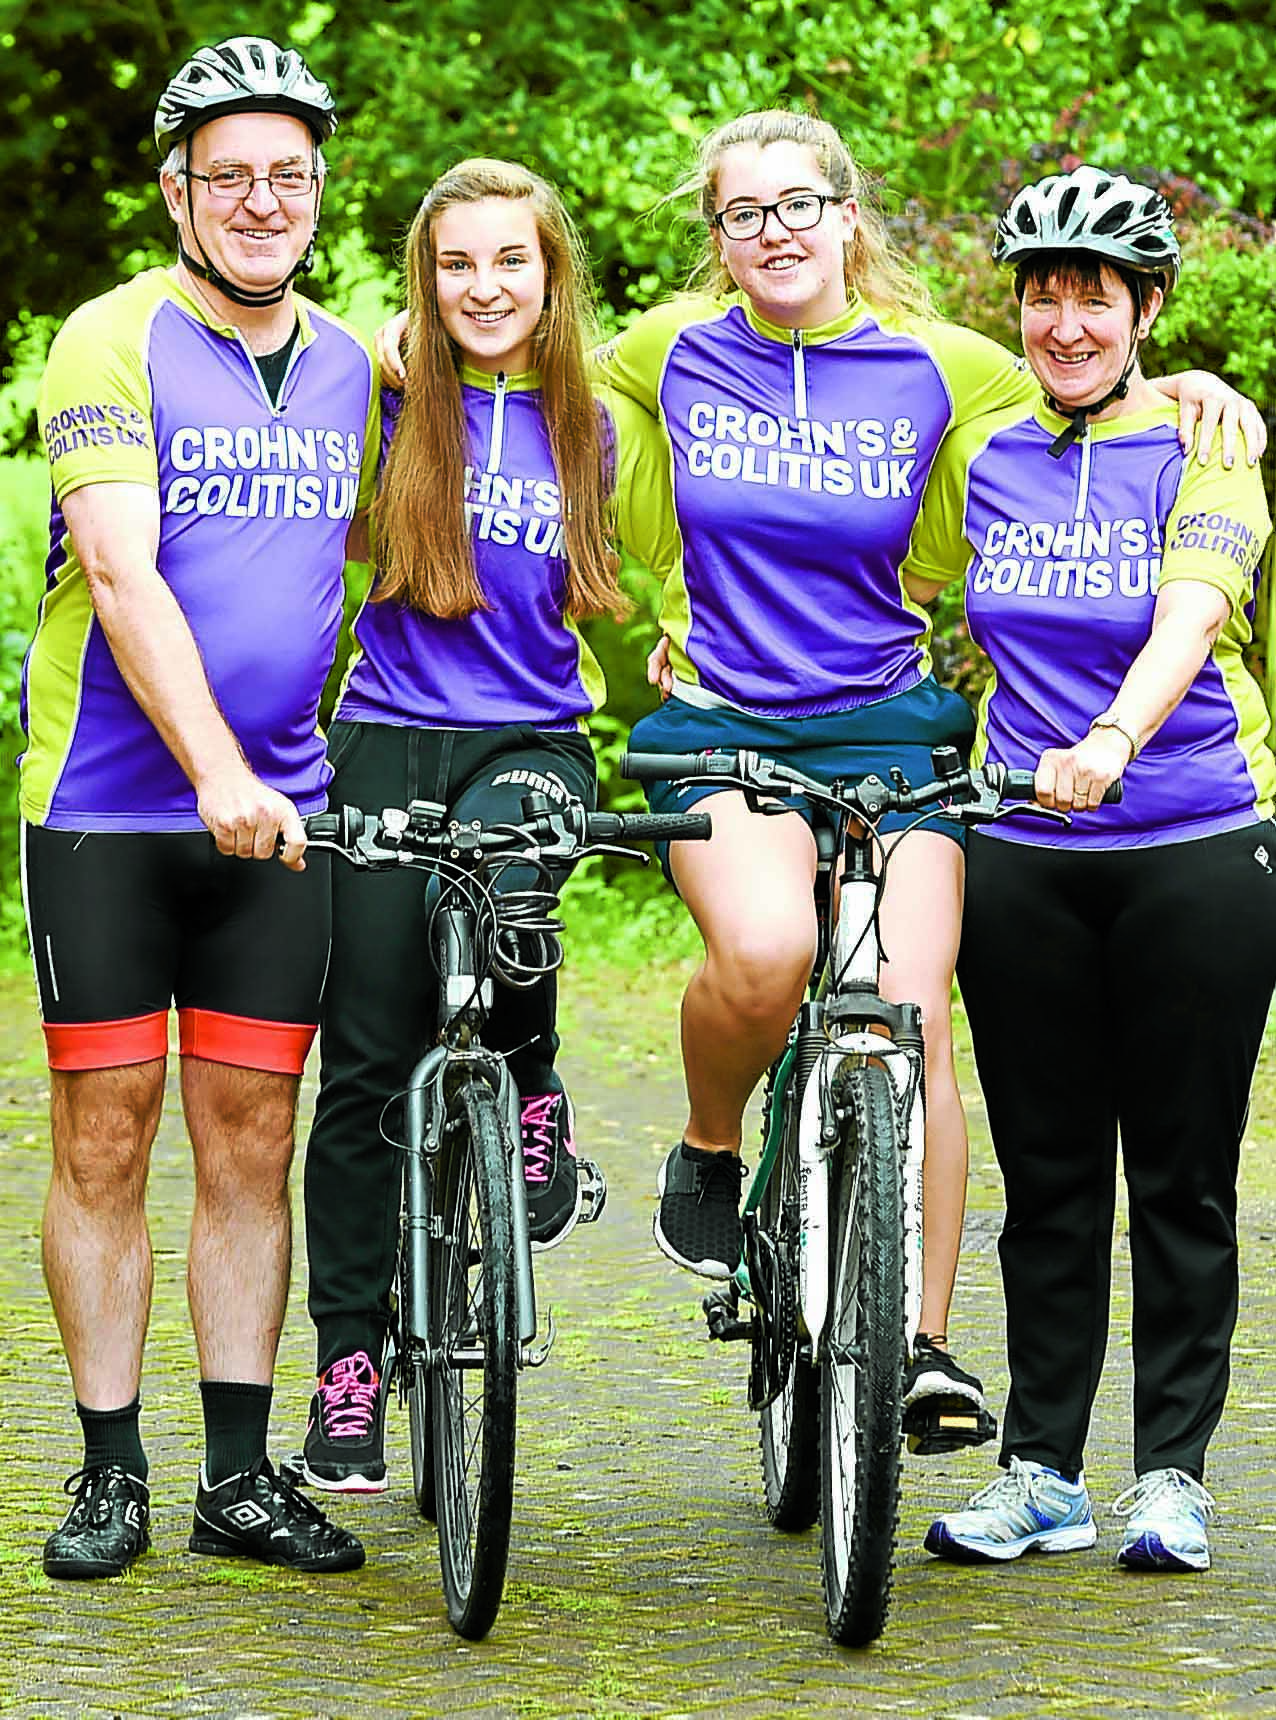 Biking family to raise cash for personal cause